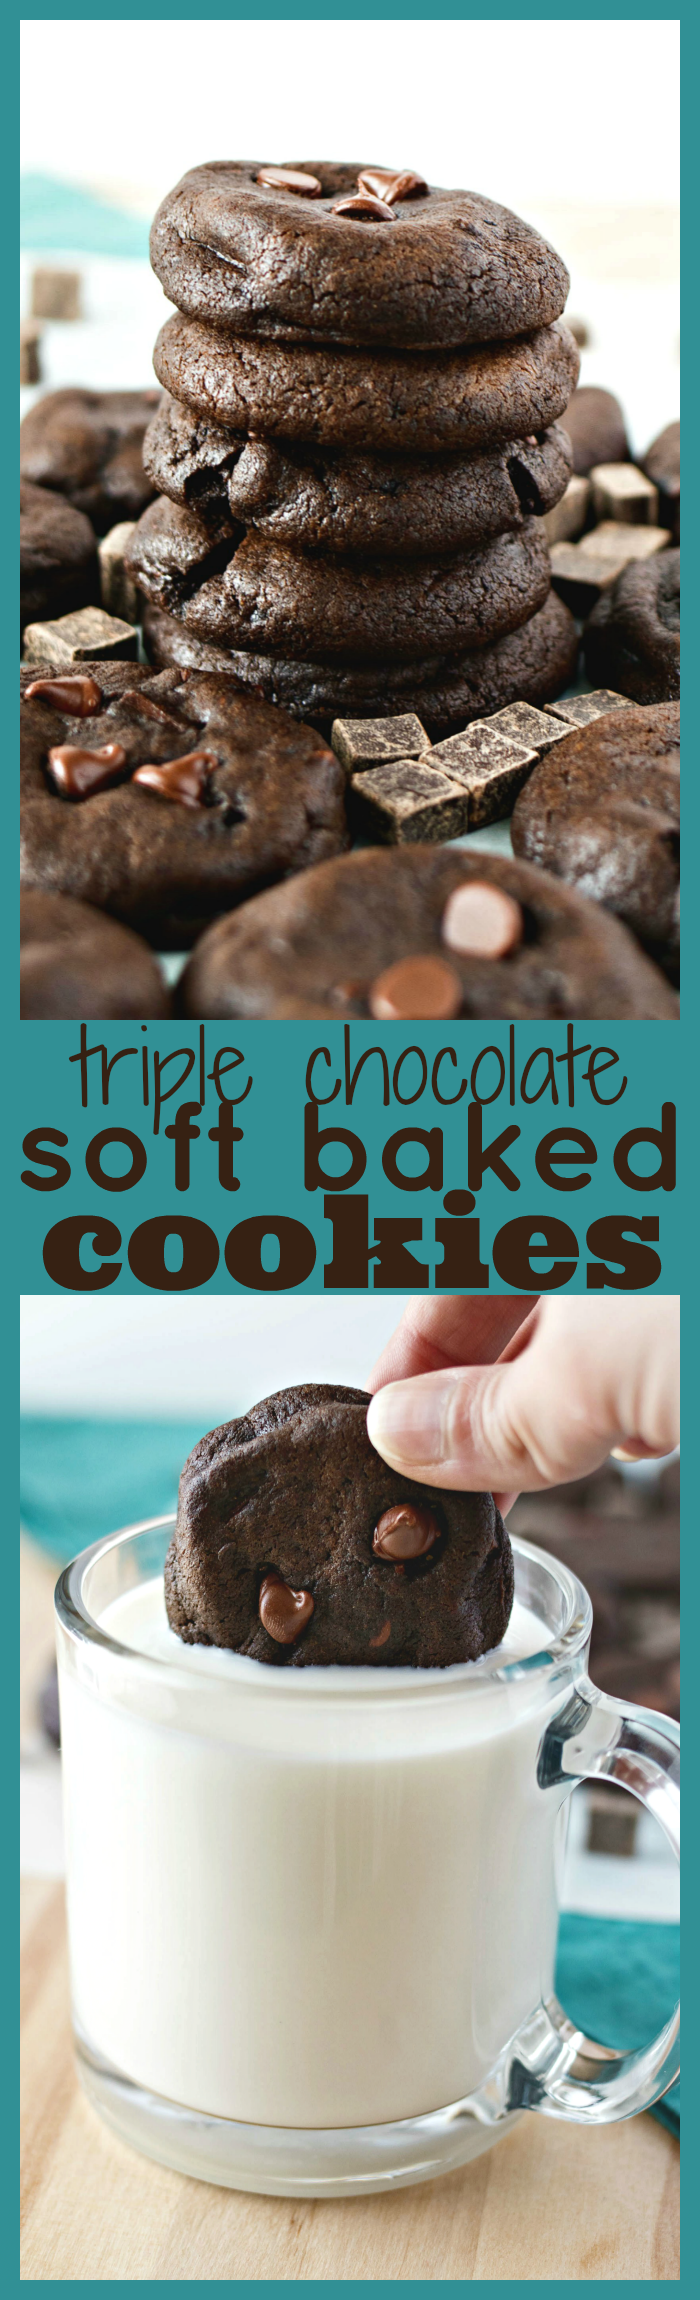 Triple Chocolate Soft Baked Cookies – A decadent soft baked cookie made with three kinds of chocolate: cocoa powder, chocolate